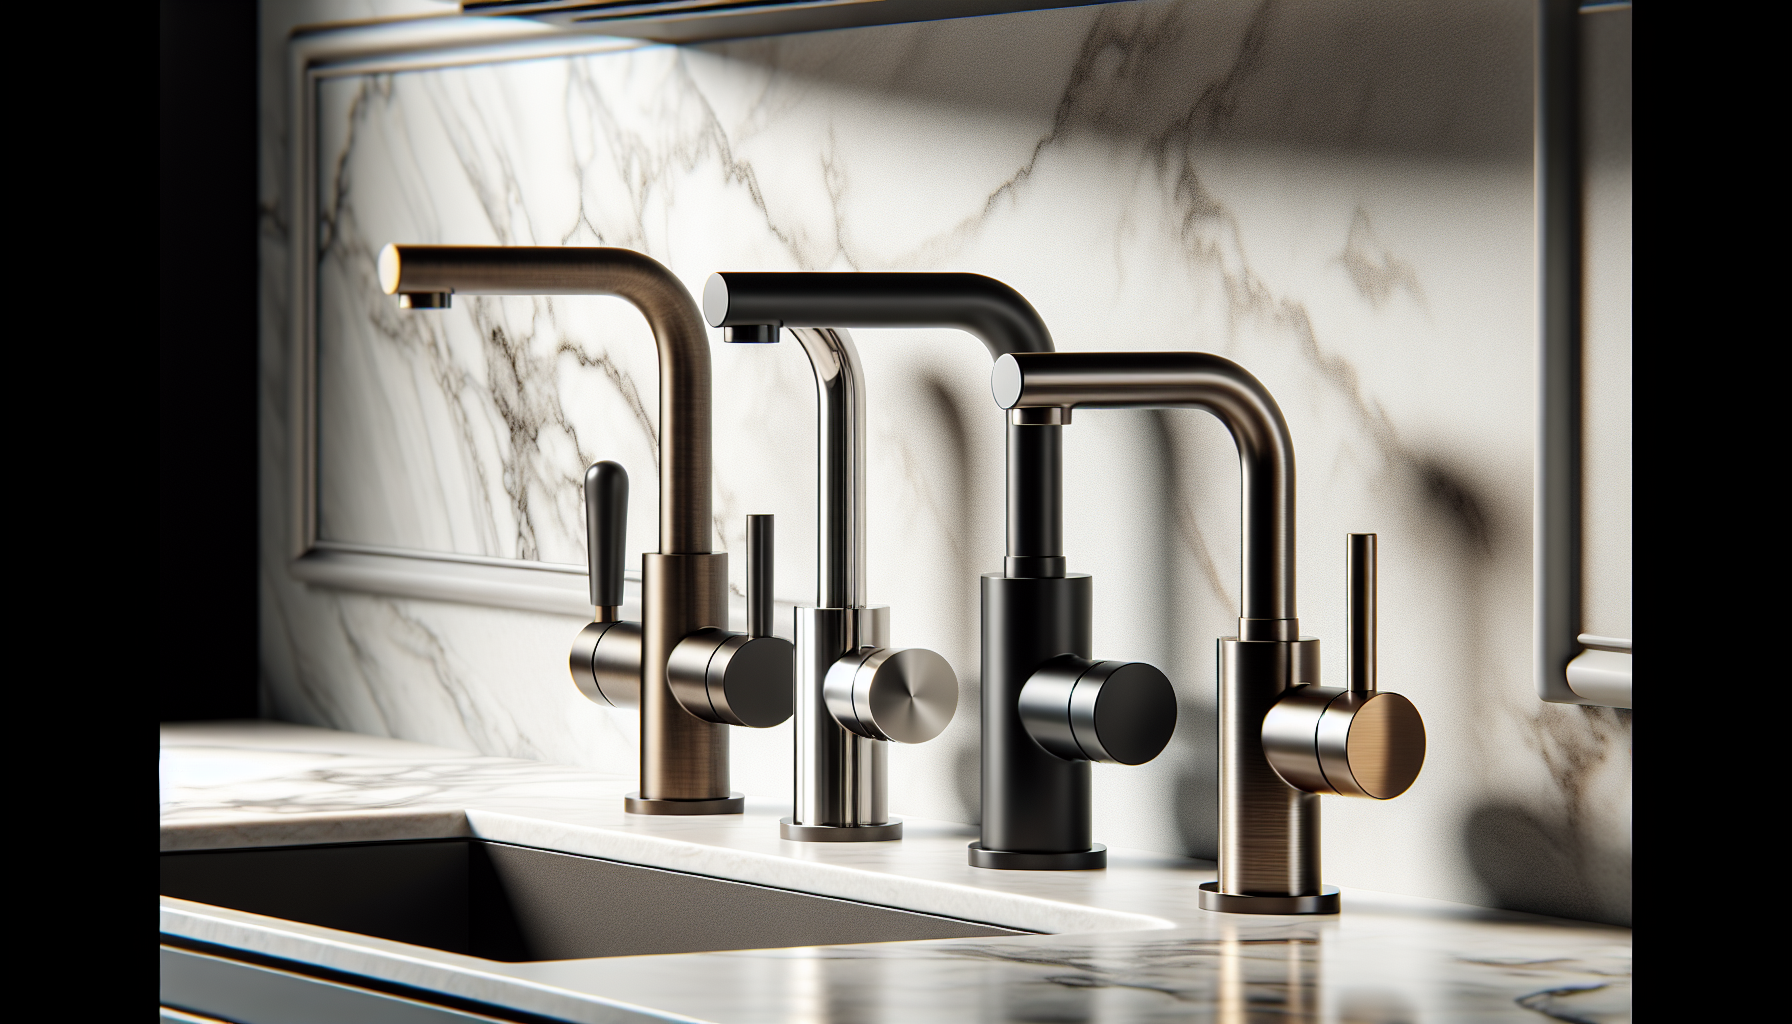 Variety of sparkling water tap designs including single, double, and triple taps